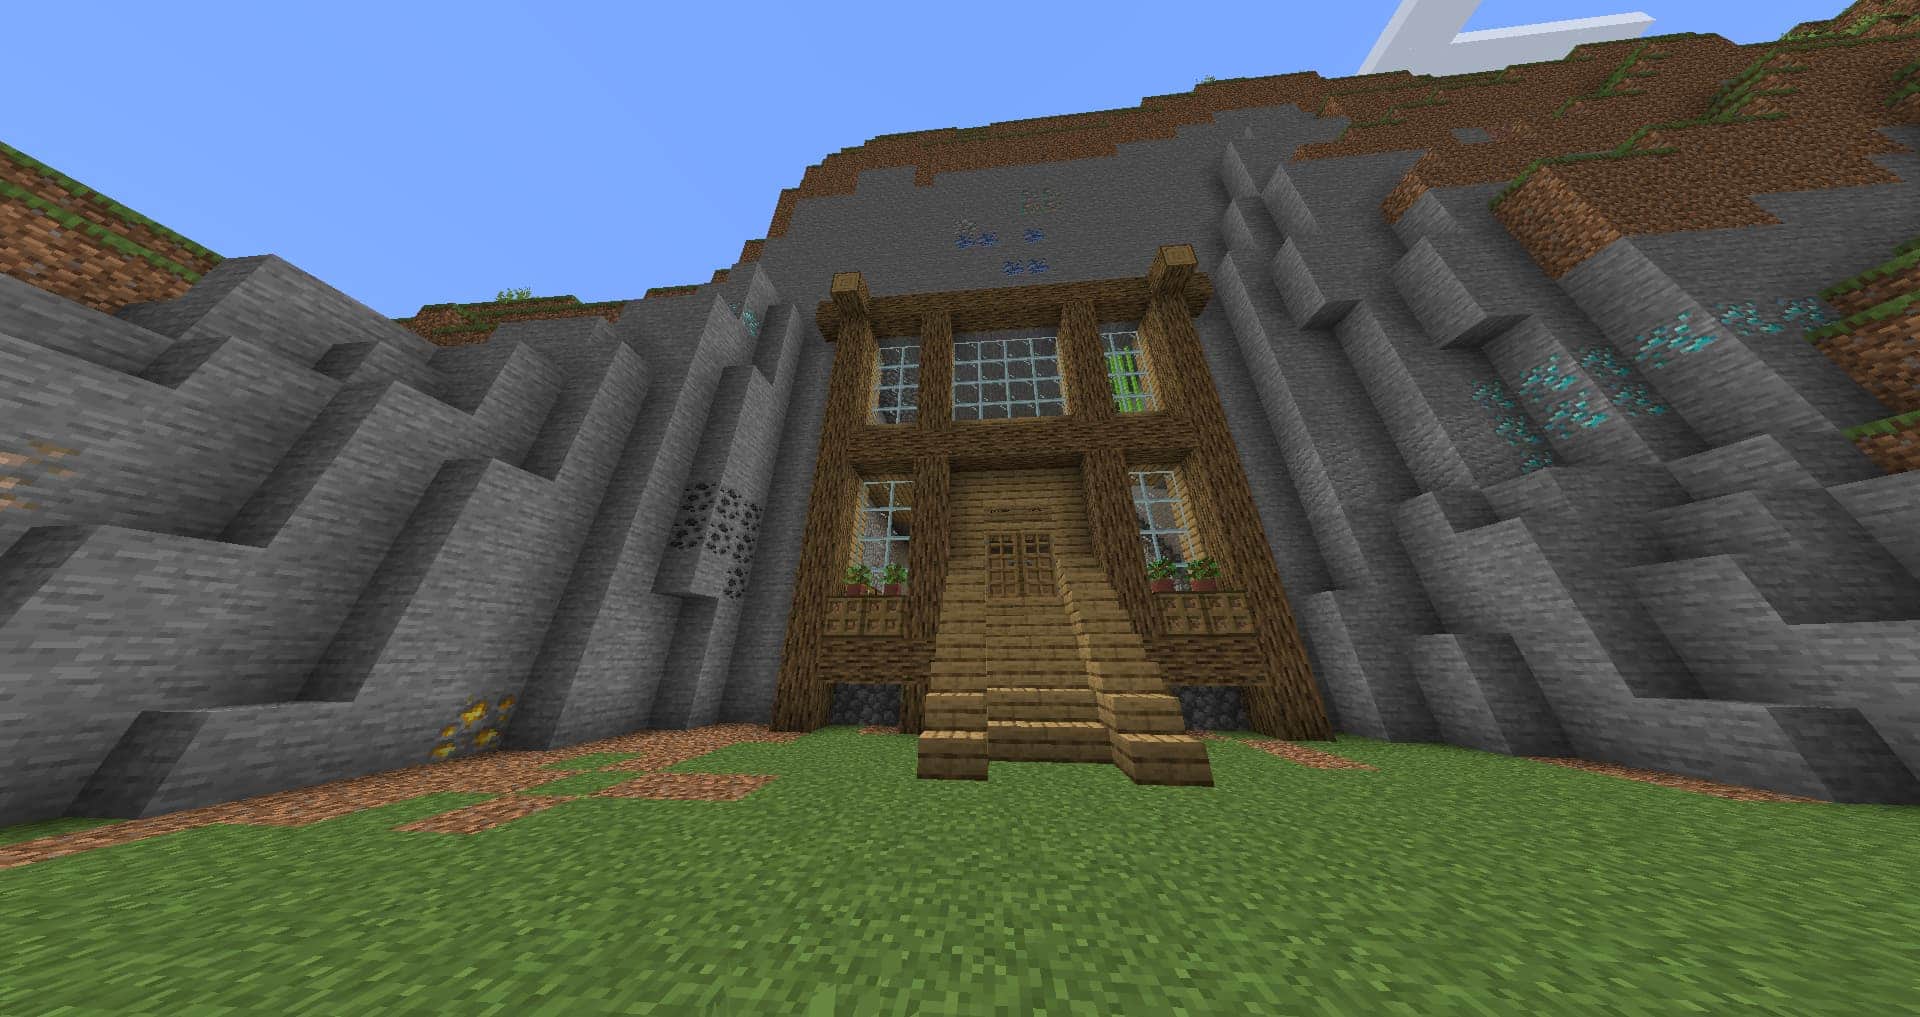 Original screenshot of my base, unfortunately it's too griefed now to take a better screenshot